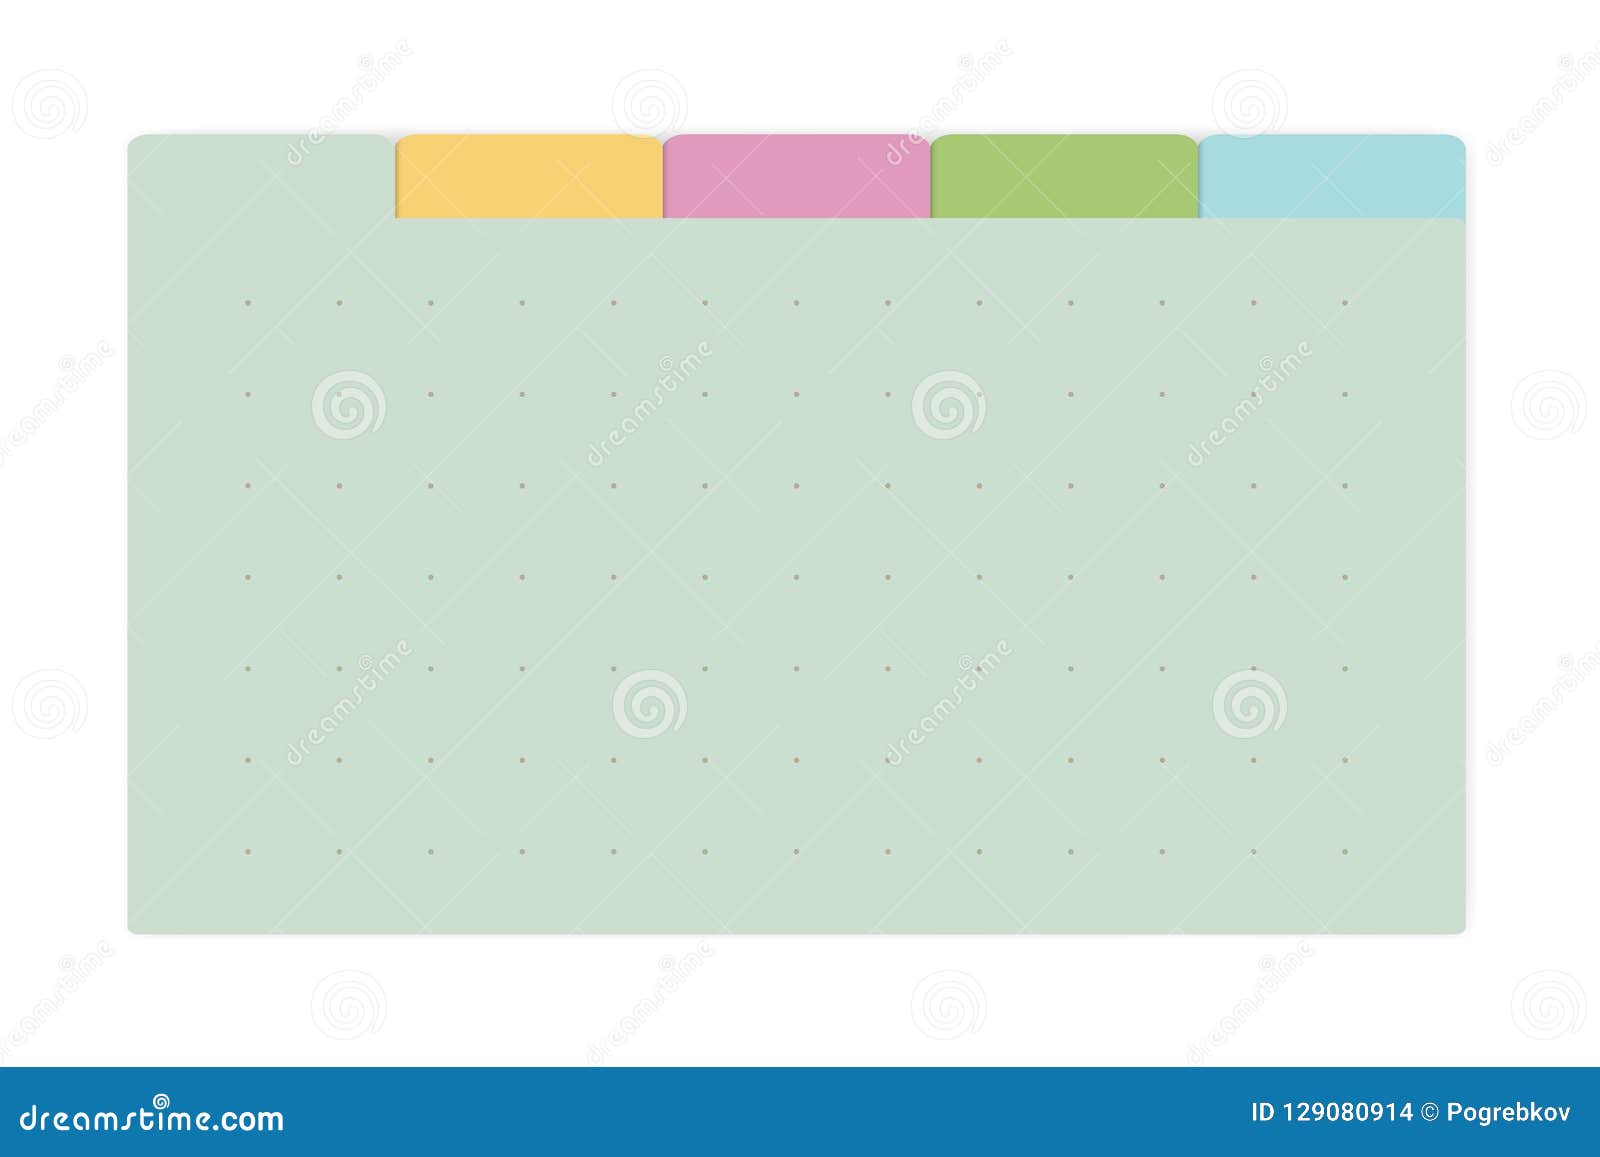 Tab Divider Template from thumbs.dreamstime.com